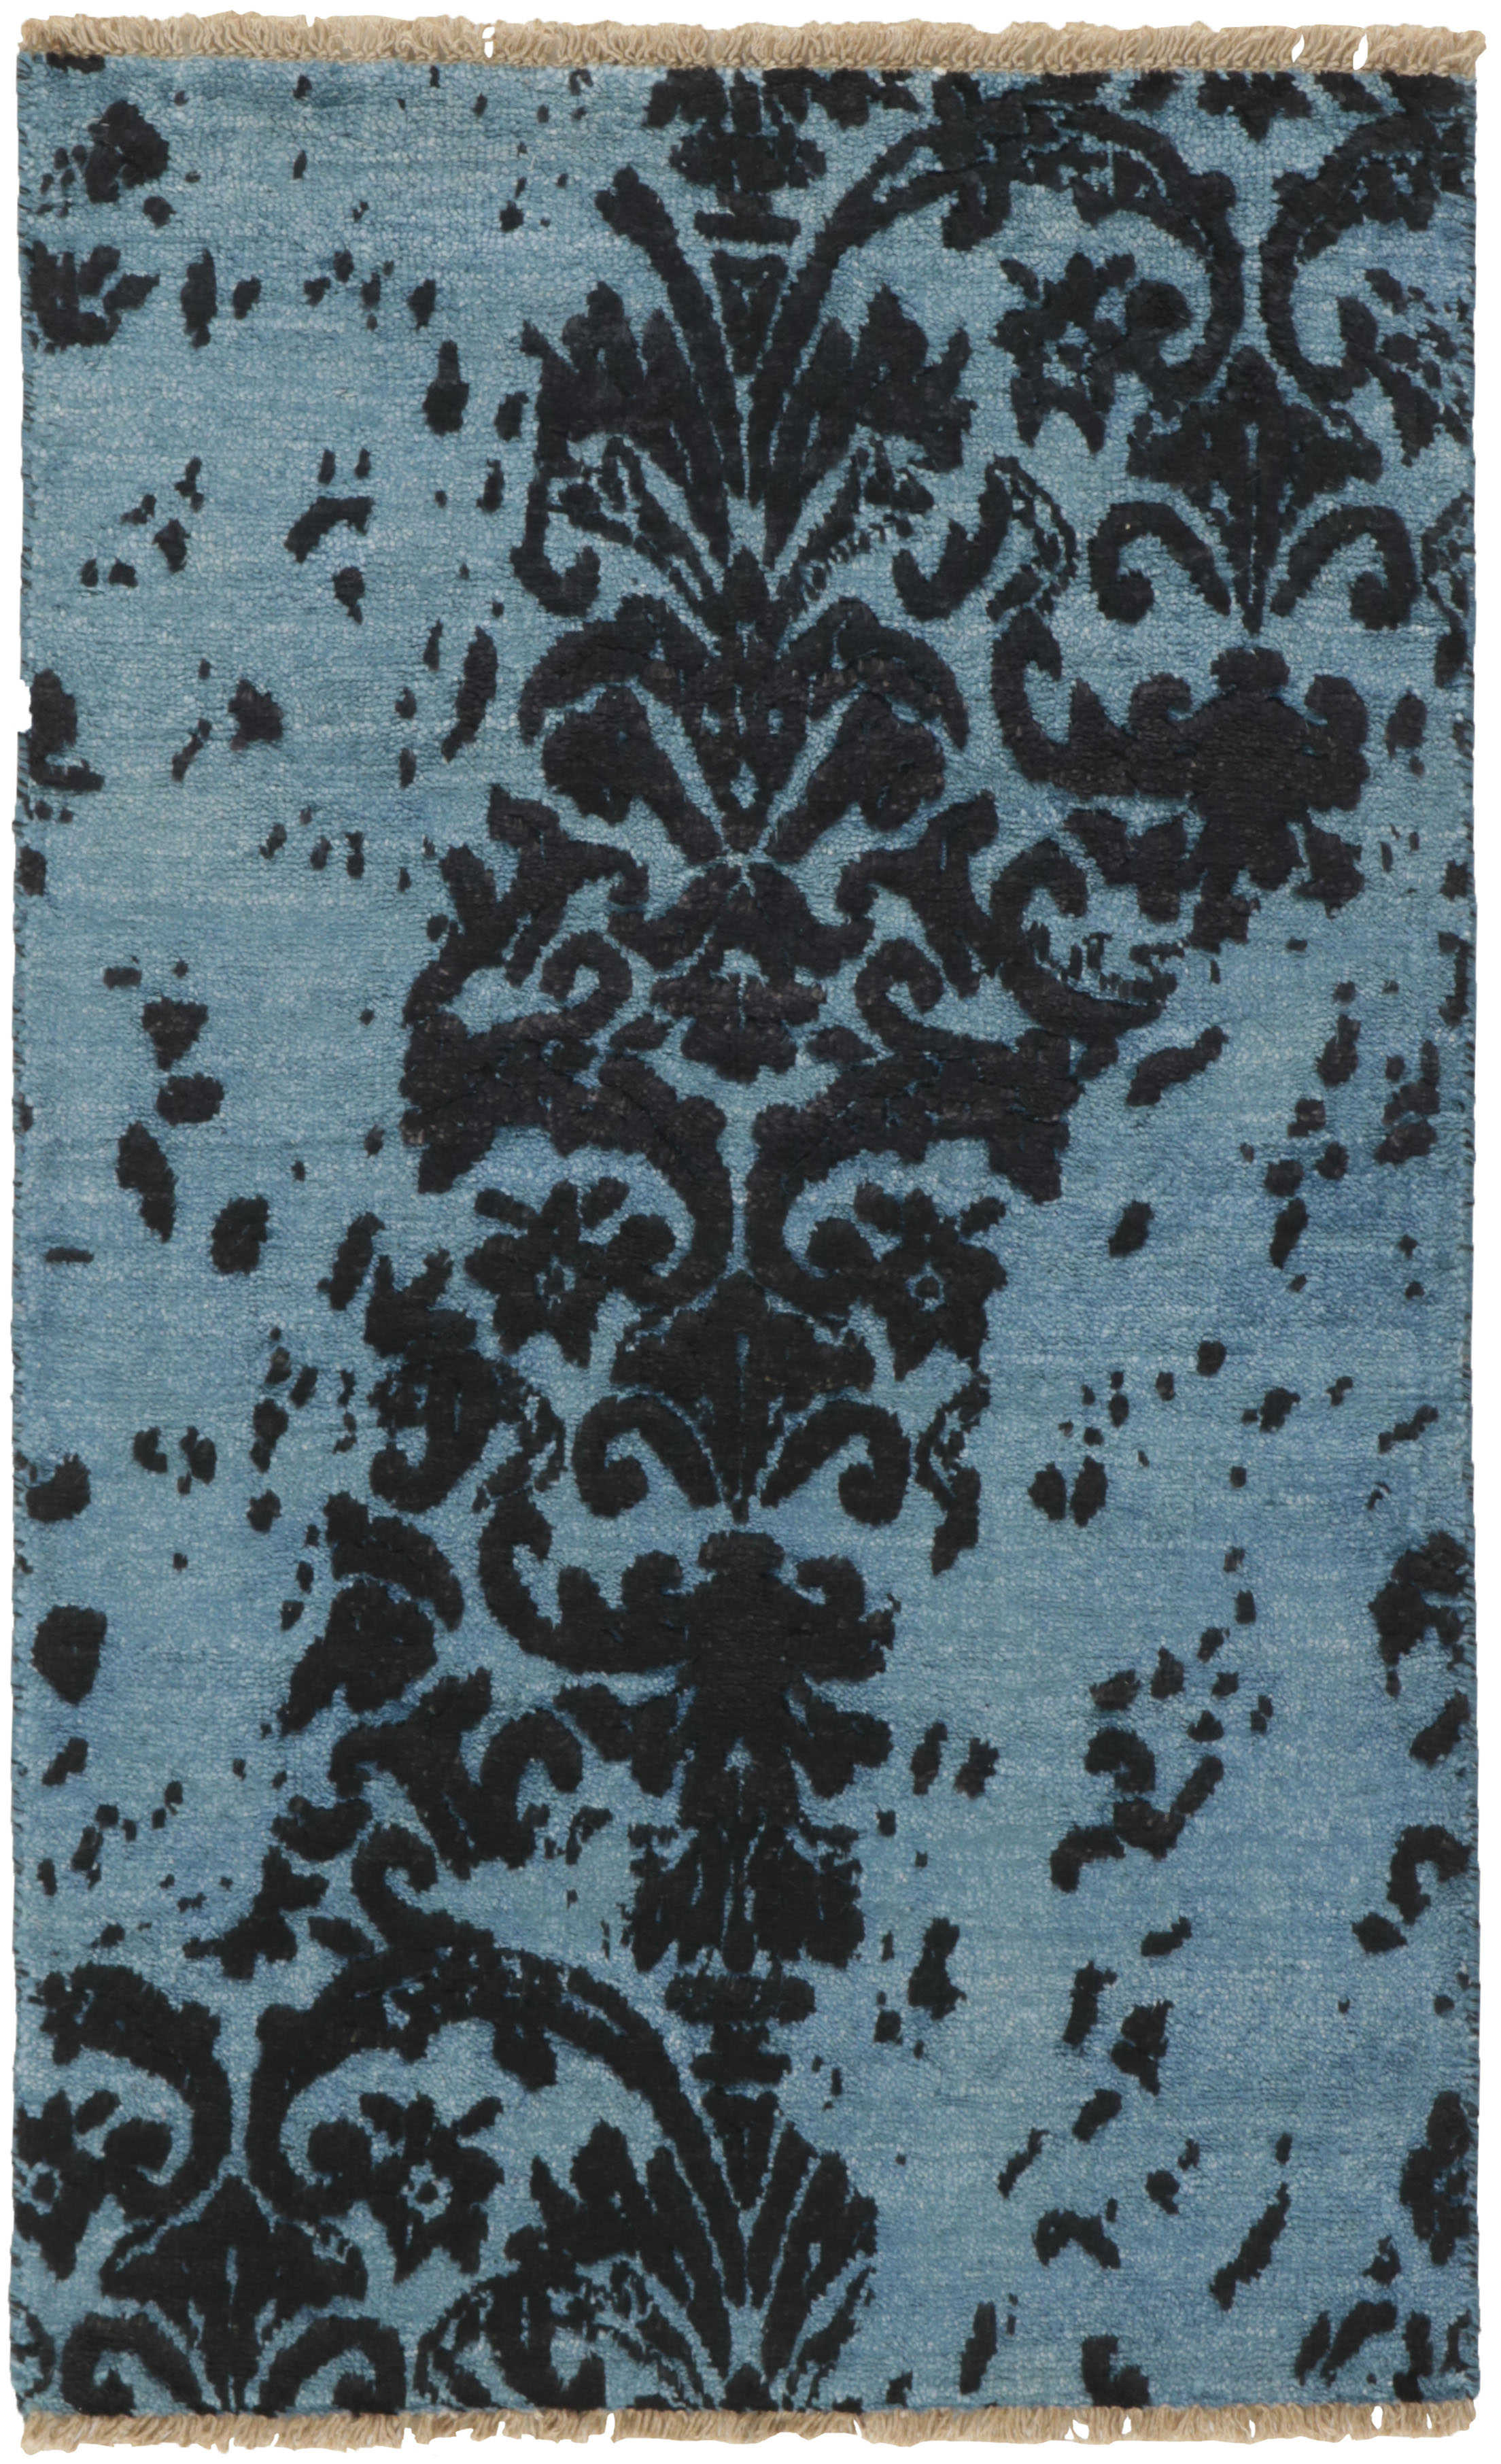 Authentic oriental rug with a damask pattern in blue and black